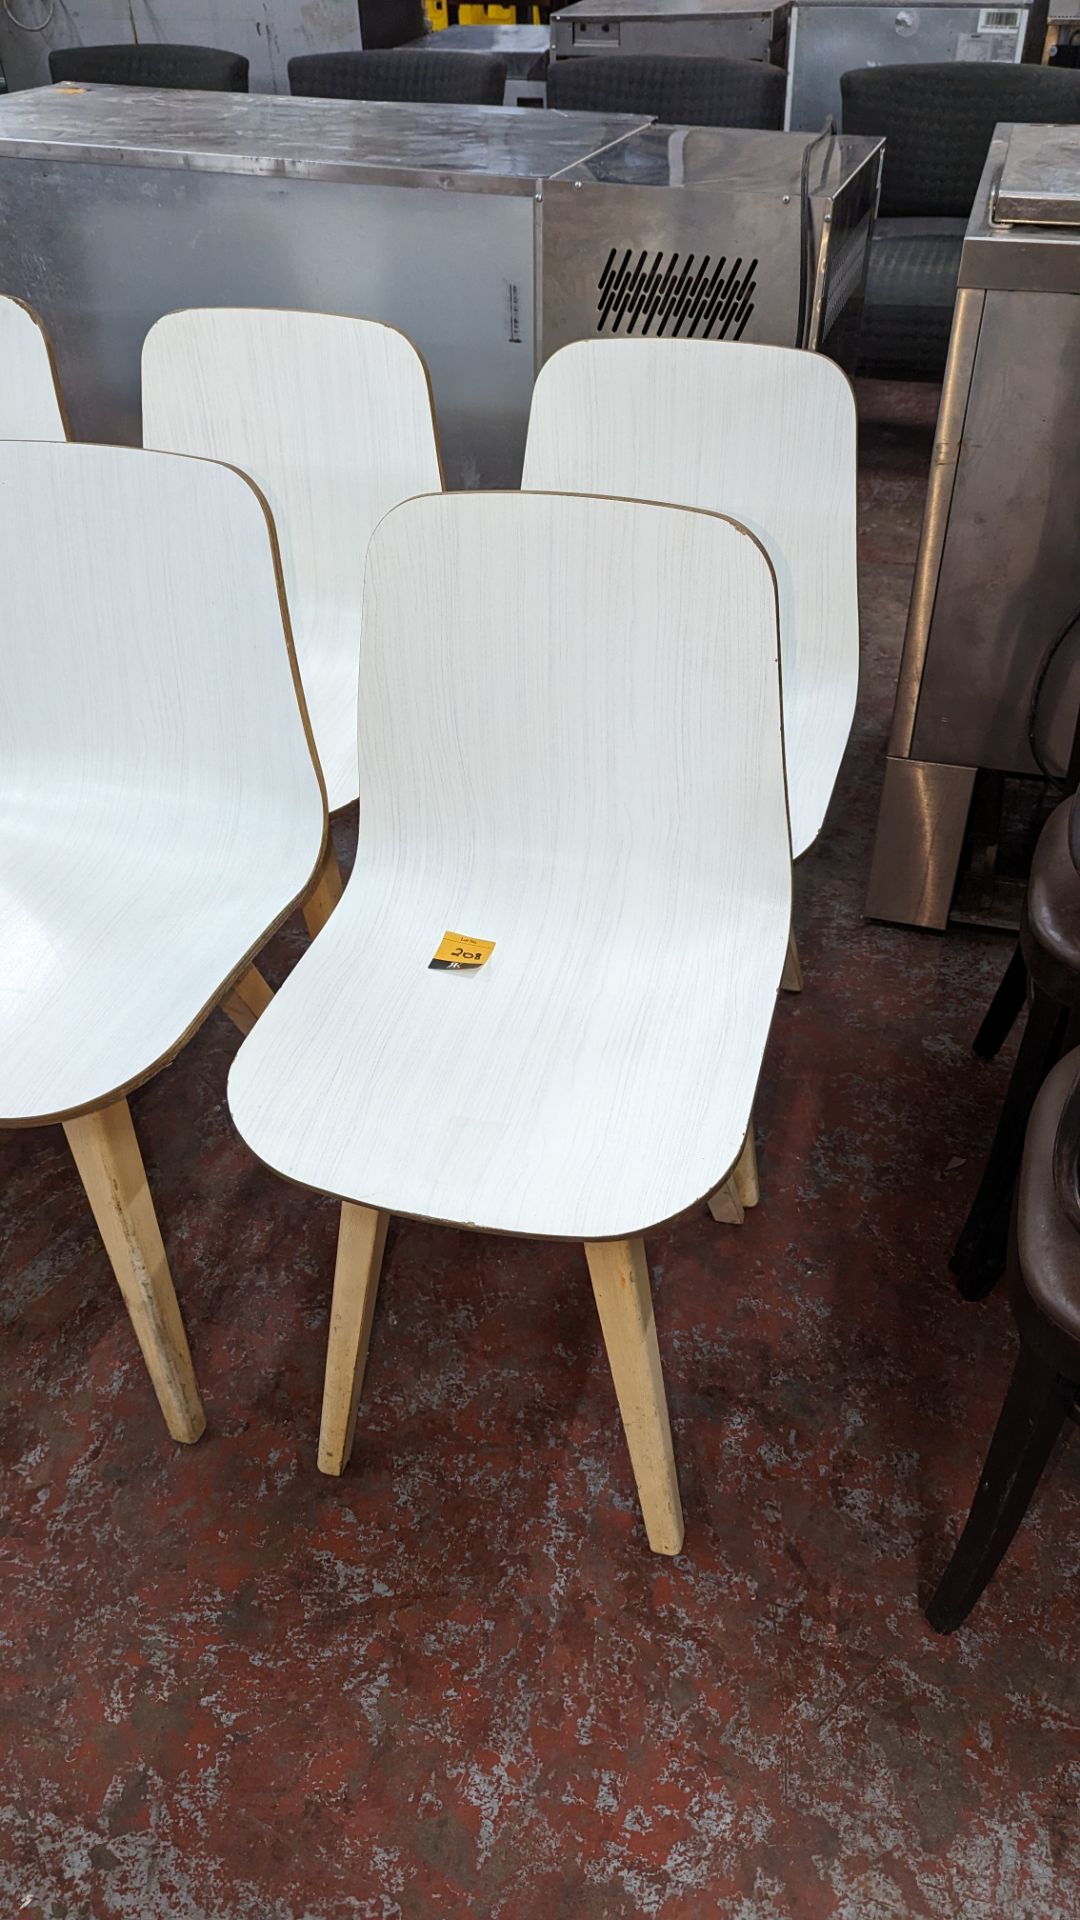 6 matching wooden chairs with white painted bases. NB these chairs look the same style, but a diffe - Image 3 of 5